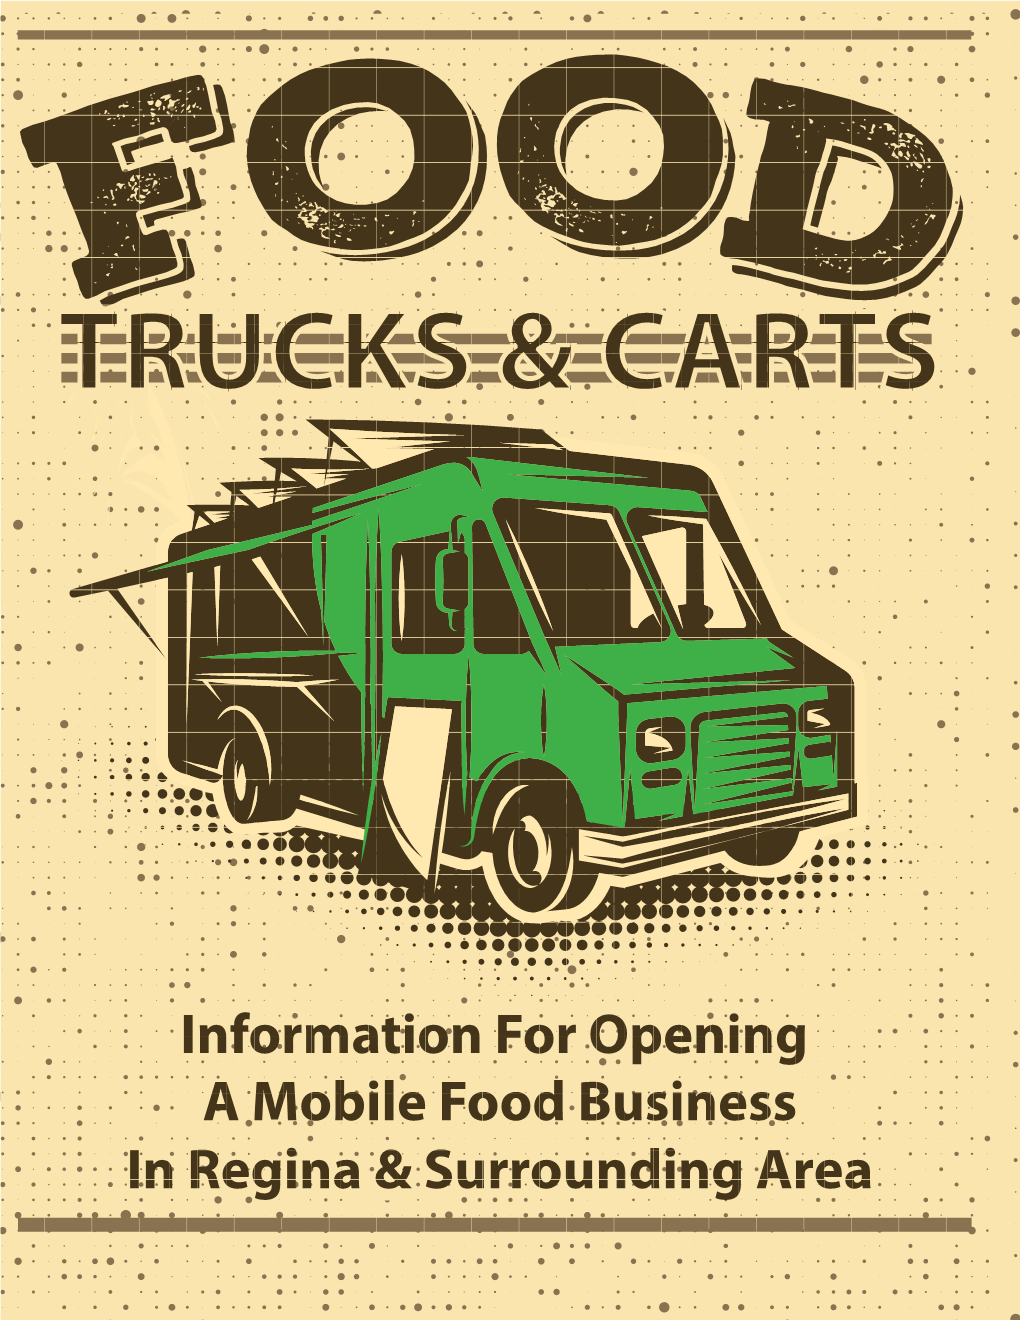 Information for Opening a Mobile Food Business in Regina & Surrounding Area